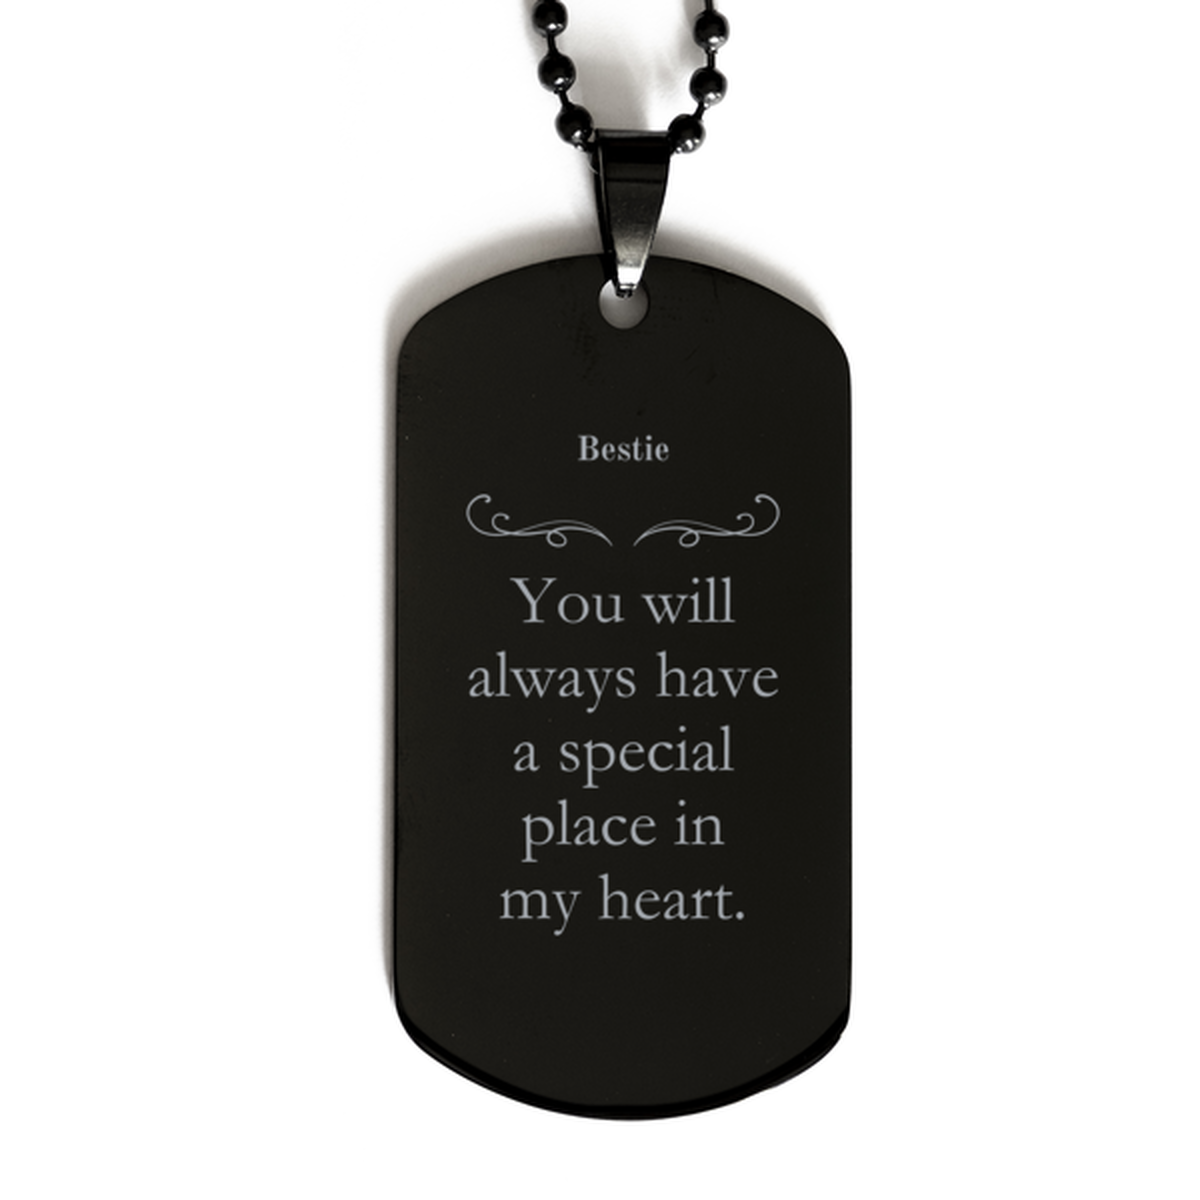 Bestie Engraved Black Dog Tag - Youll always have a special place in my heart - Unique Gift for Bestie - Confidence and Inspiration - Meaningful Birthday, Christmas, Graduation Gift - Dog Tag for Bestie - Special Bestie Gift - Heartfelt Bestie Dog Tag